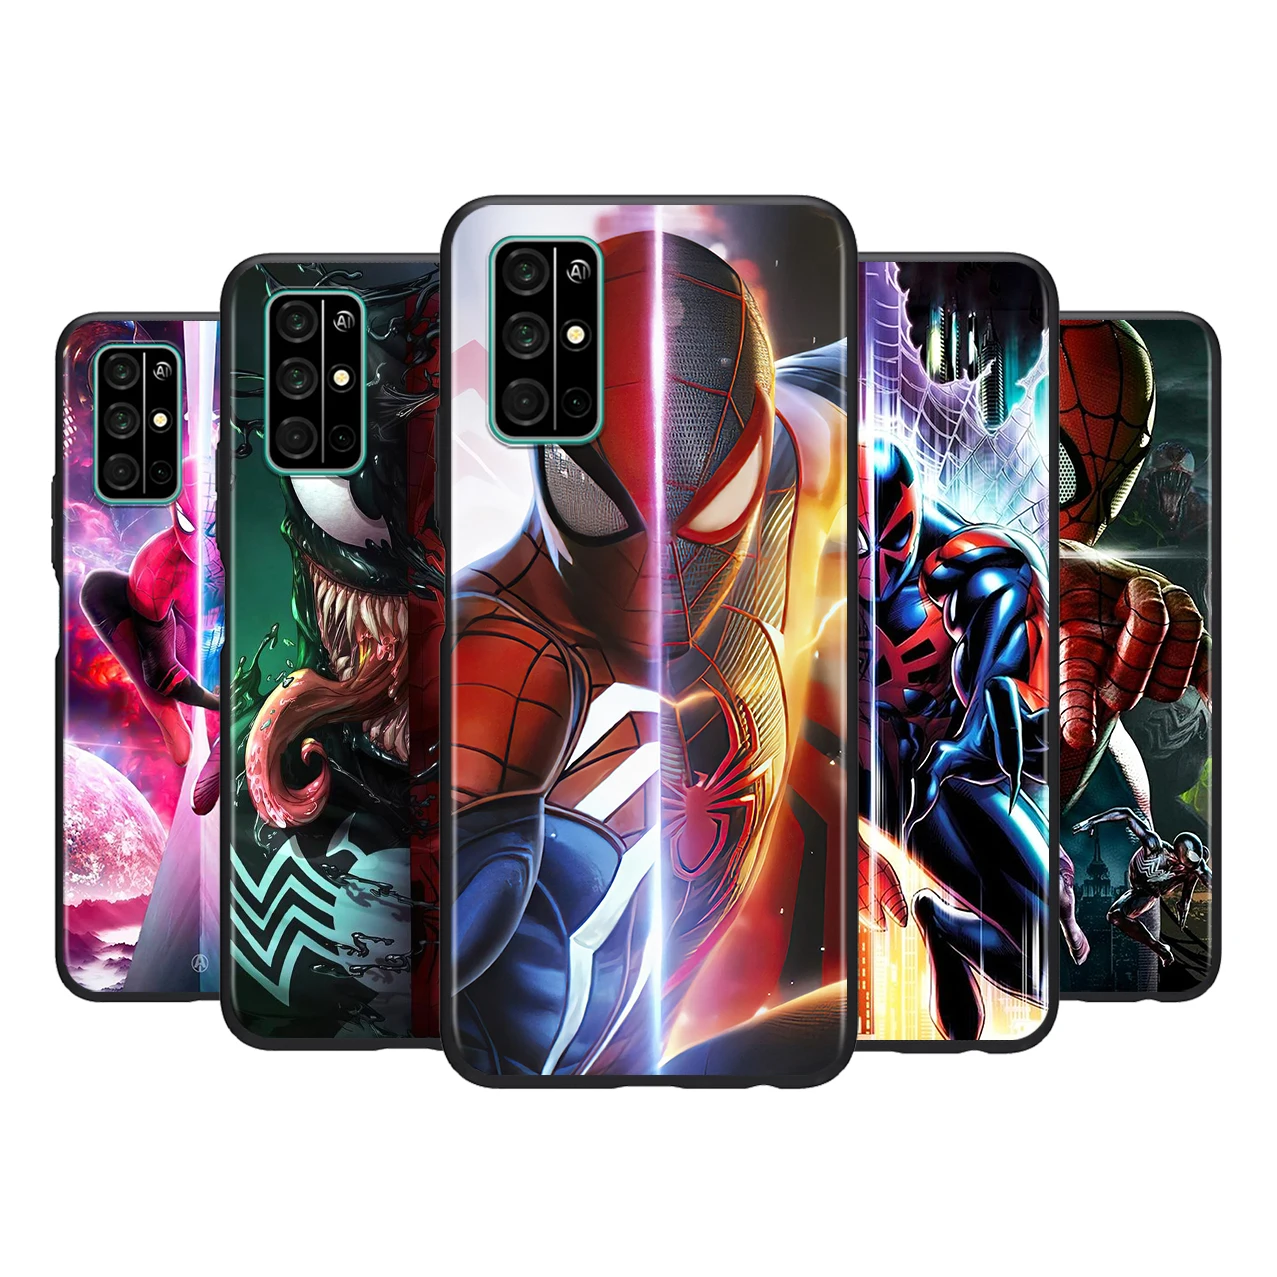 

Marvel Avengers Spiderman For HUAWEI Honor 50 30 V30 20 View 20 20E X10 10 Pro SE Lite 5G Silicone Black Soft Phone Case